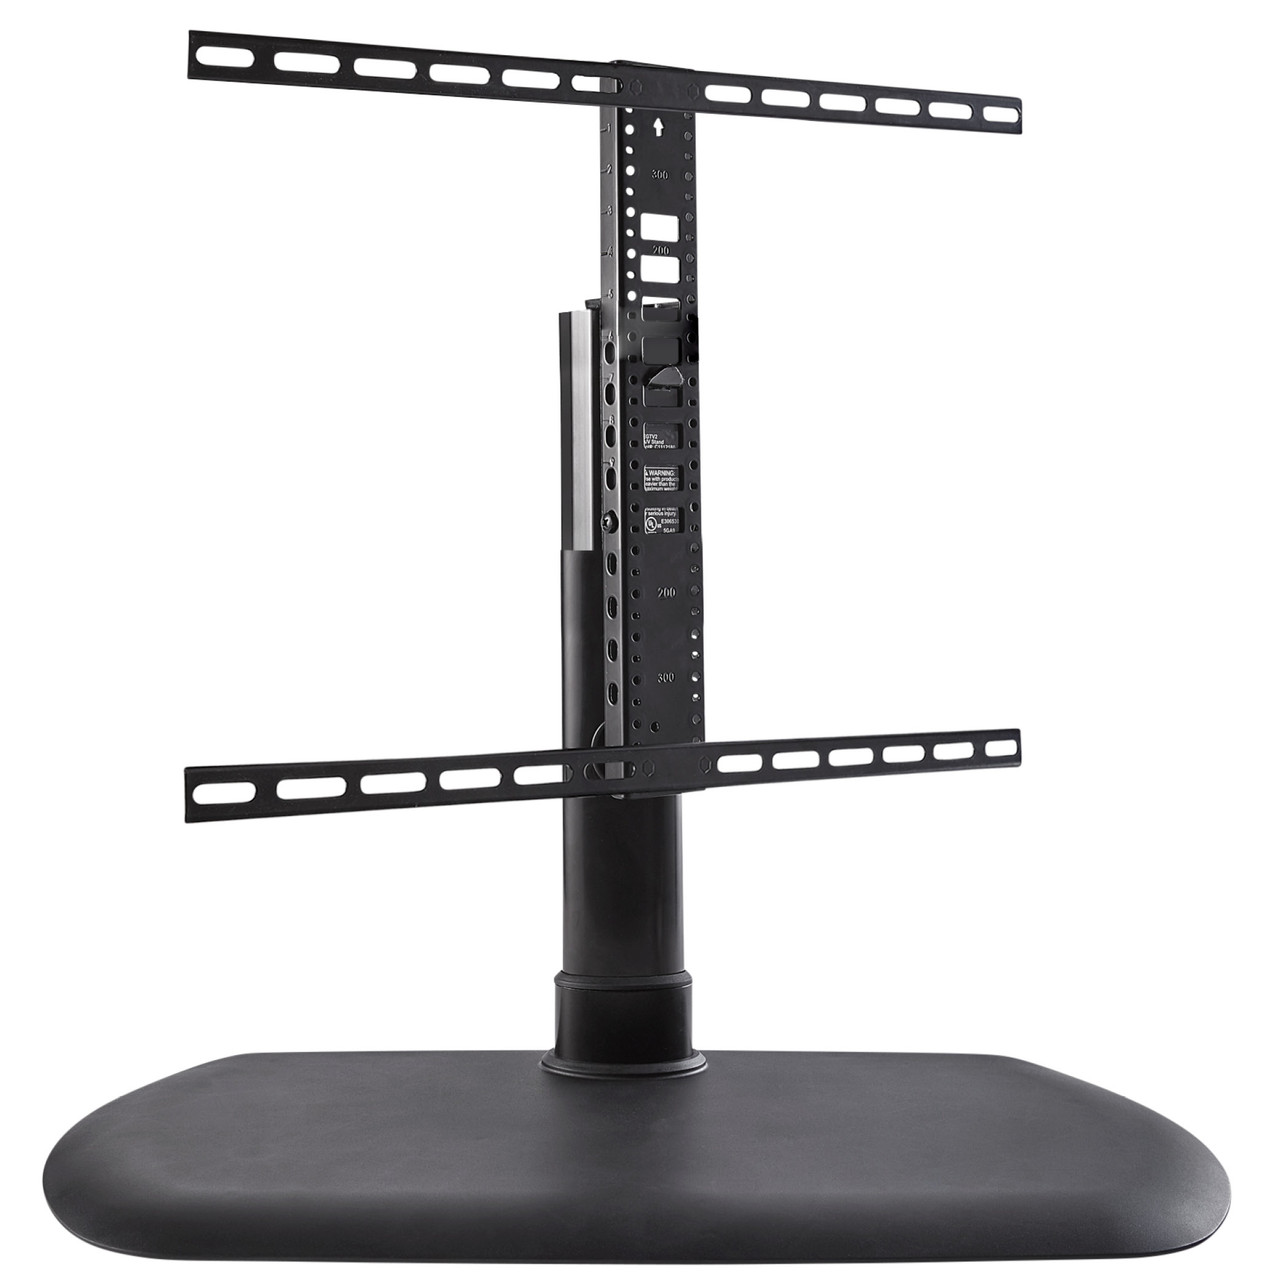 Universal Swiveling TV Stand For TVs Up To 65" - ECHOGEAR